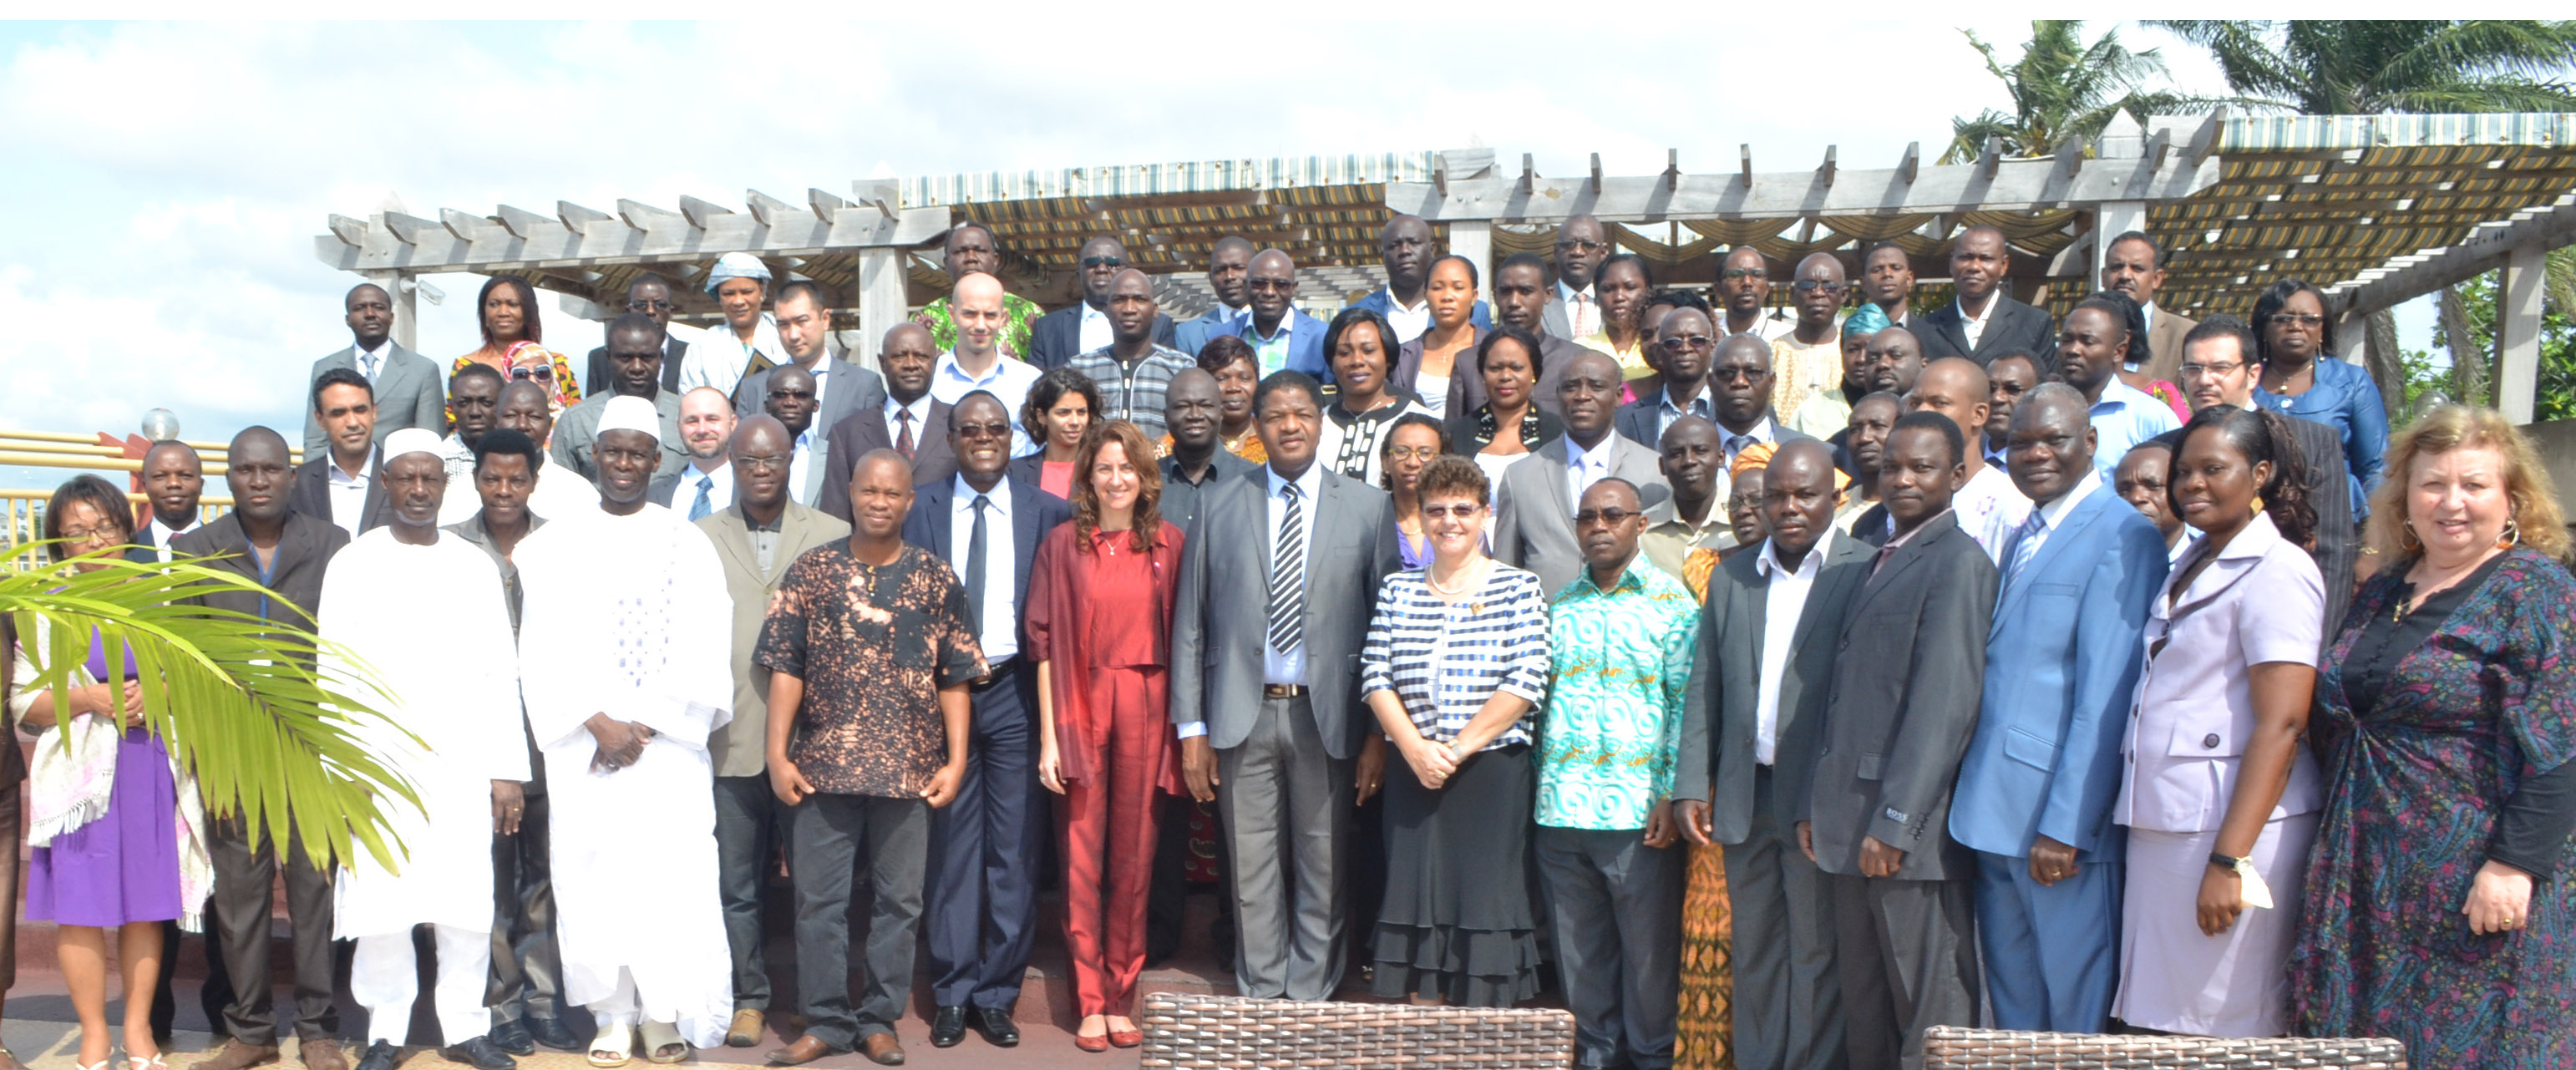 Workshop of French-speaking countries in Western Africa on costing, tracking expenditure and participatory evaluation of the impacts of interventions aimed at improving nutrition